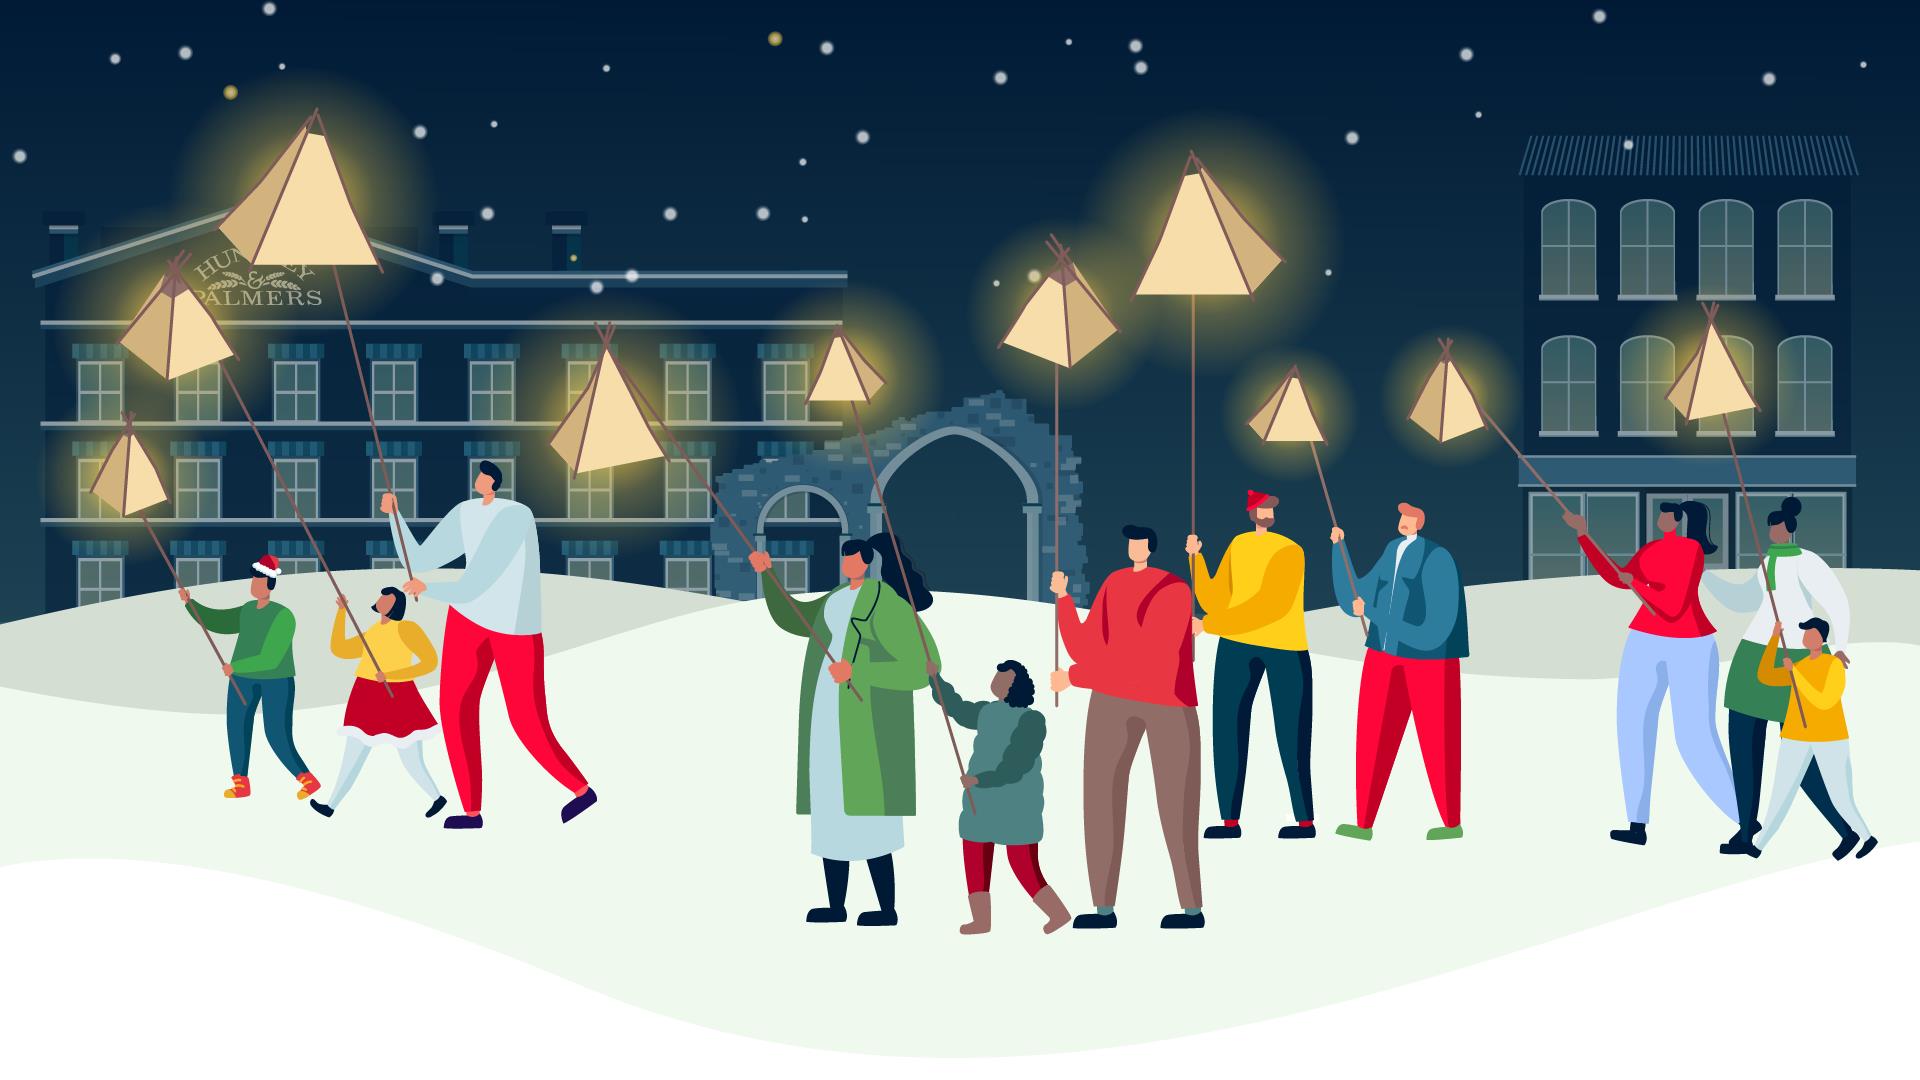 Illustrated Christmas scene showing a lantern parade in Reading